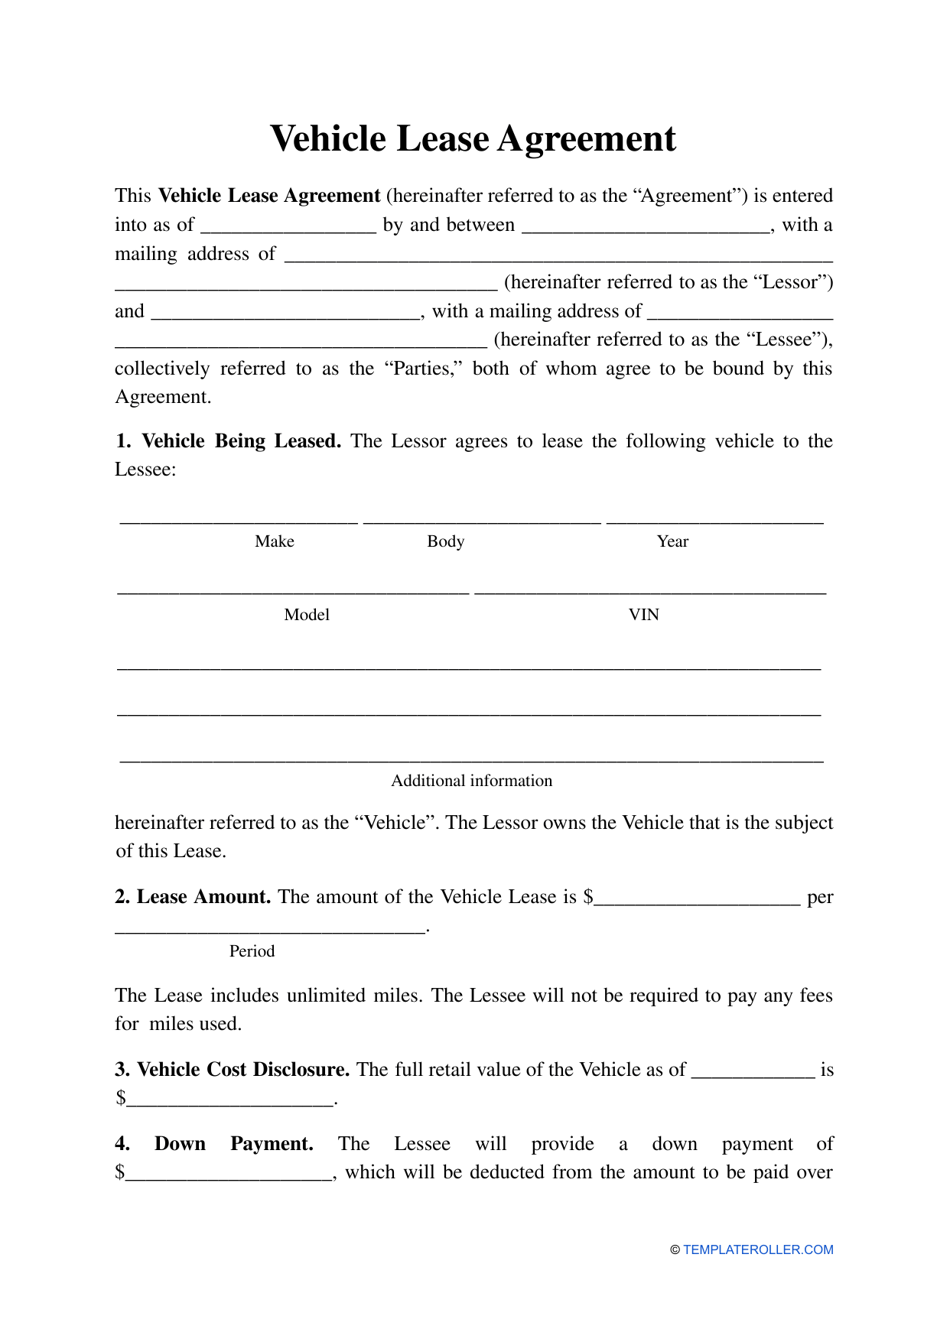 Vehicle Lease Agreement Template Download Printable PDF In lease of vehicle agreement template